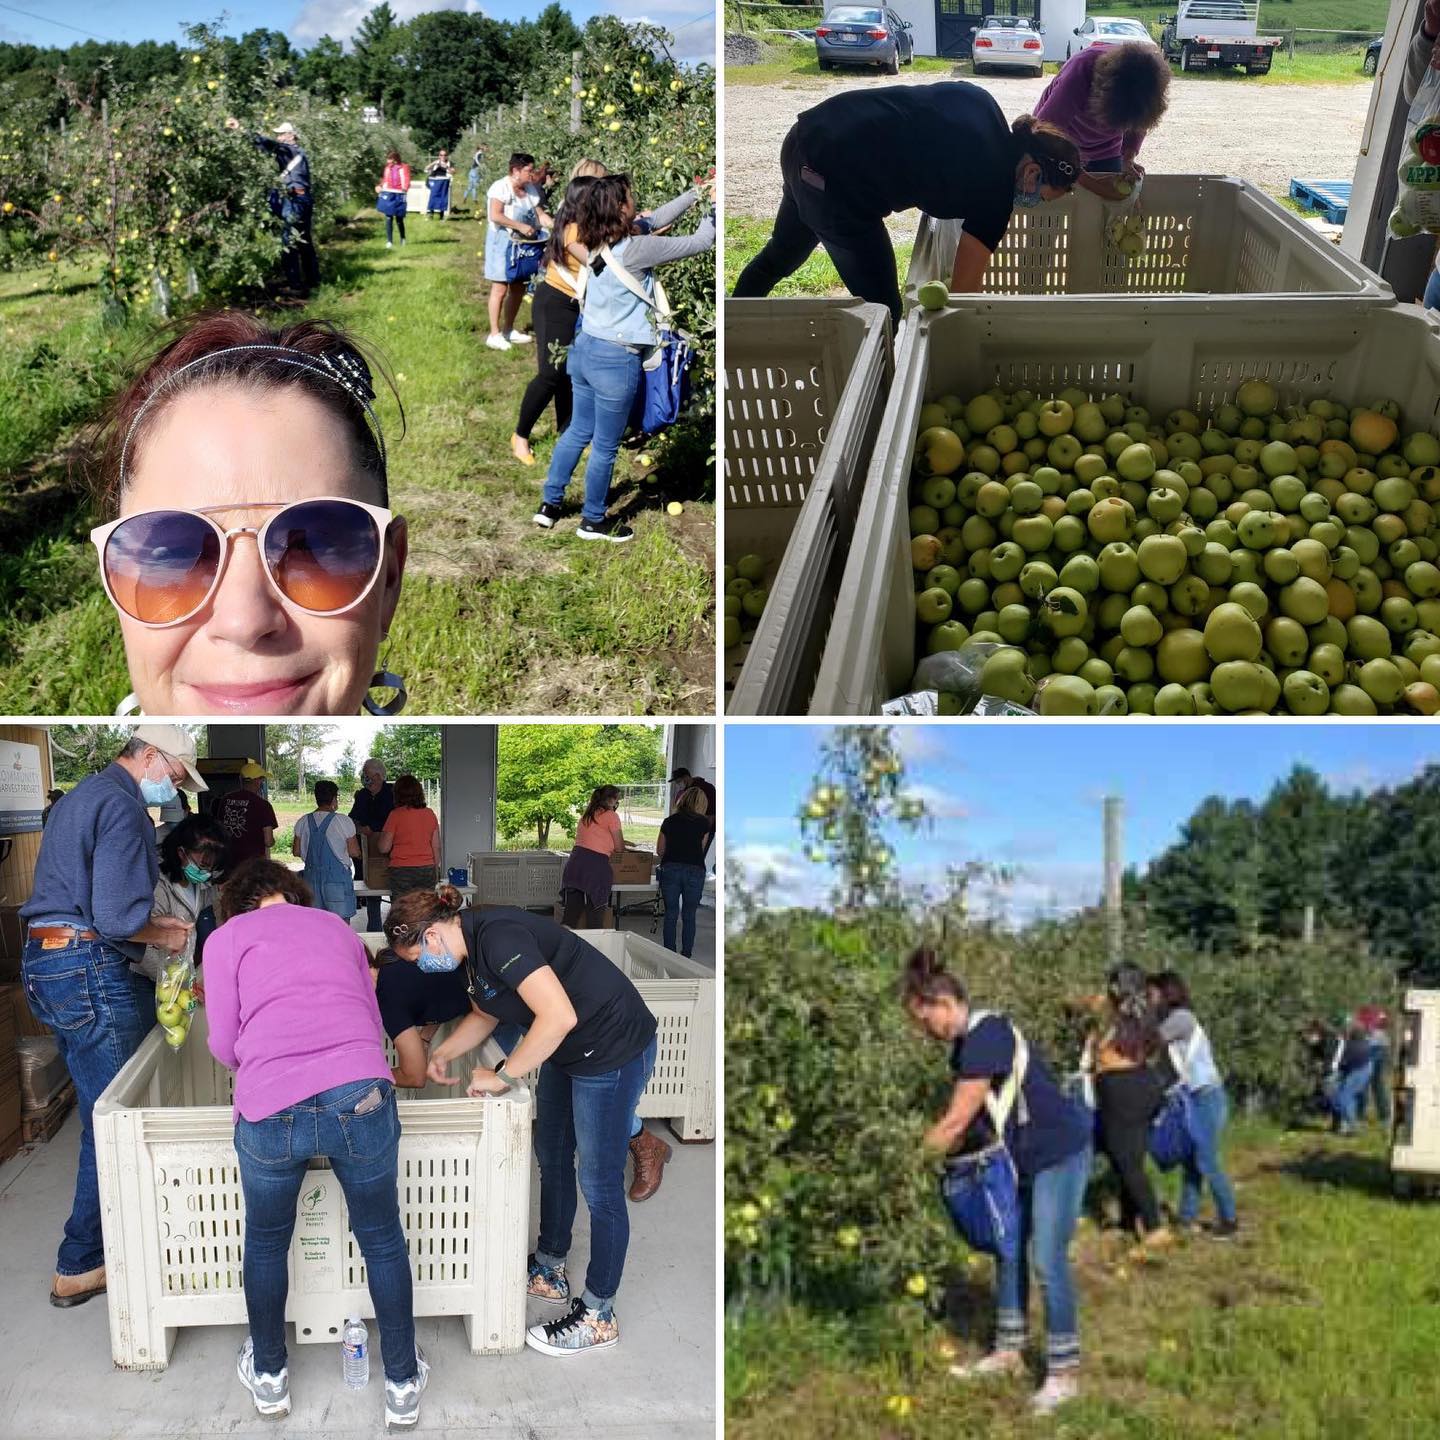 To celebrate National Food Bank Day, Kristie and Zena from @ardentstaffing got out to harvest apples for the Community Harvest Project.
Thank you for harvesting thousands of apples that were immediately shipped to the local food pantries.